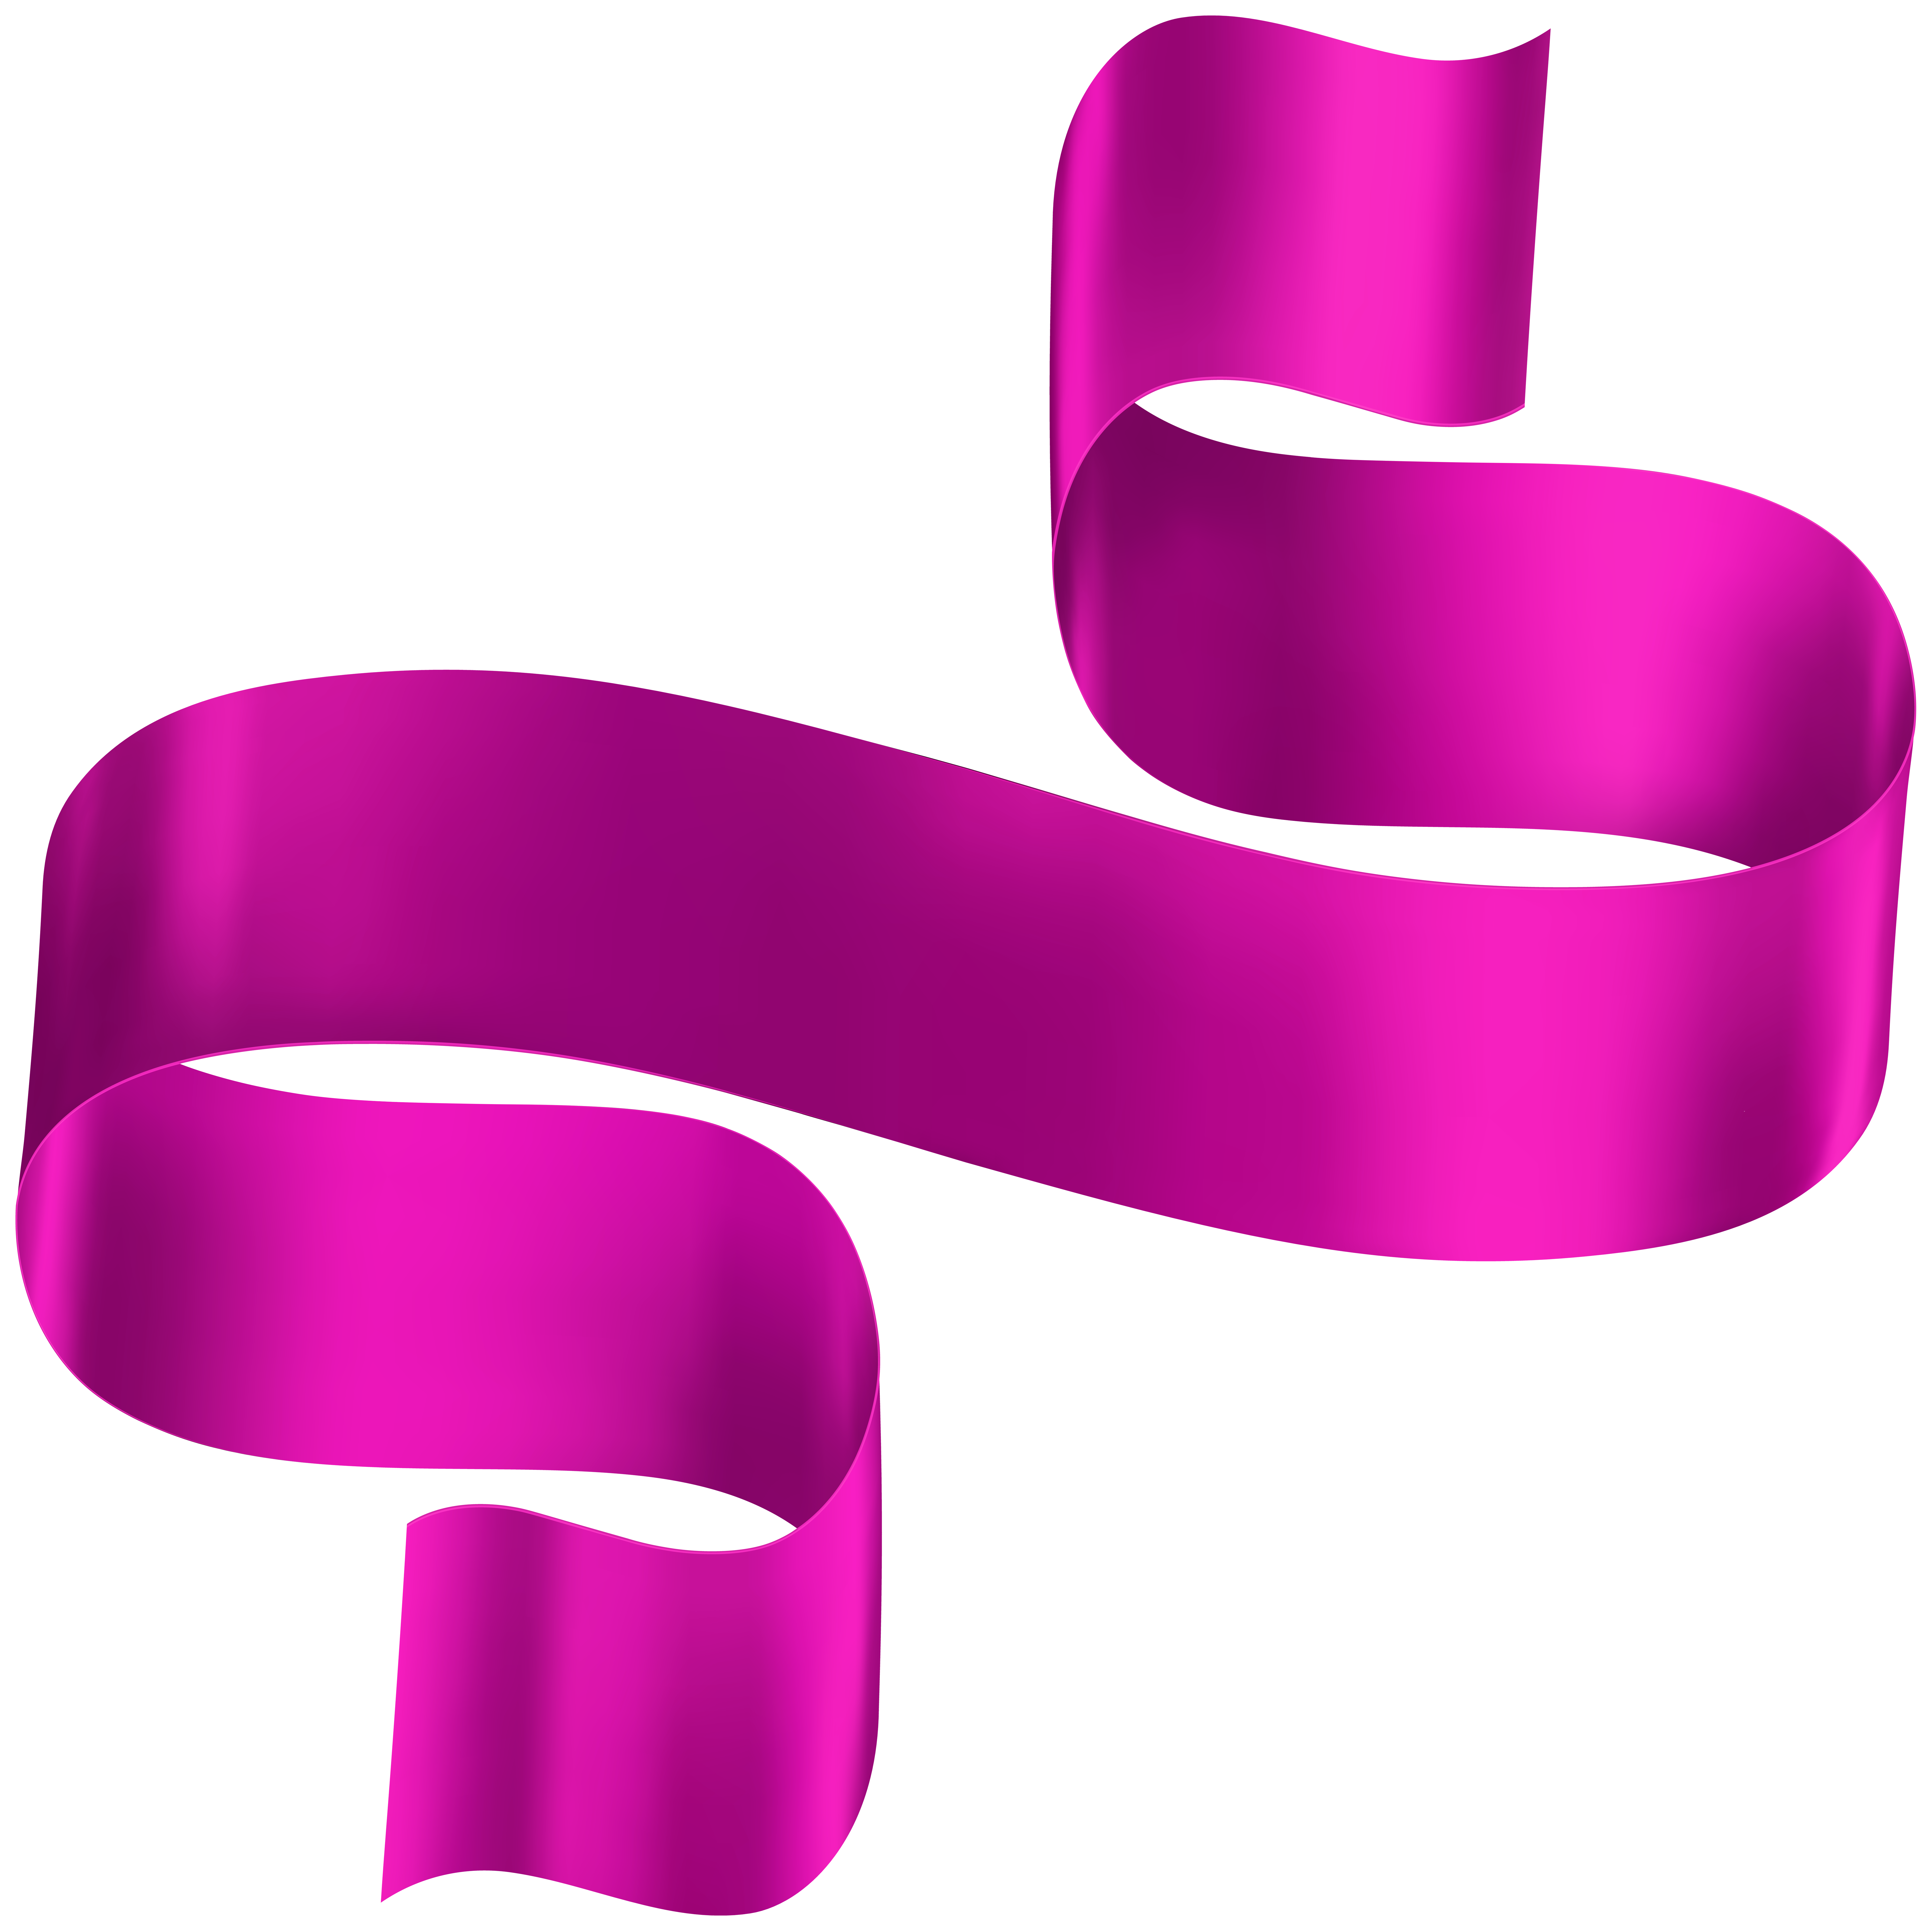 Pink Ribbon PNG Clipart Picture​, Gallery Yopriceville - High-Quality  Images and Transparent PNG Free Clipart